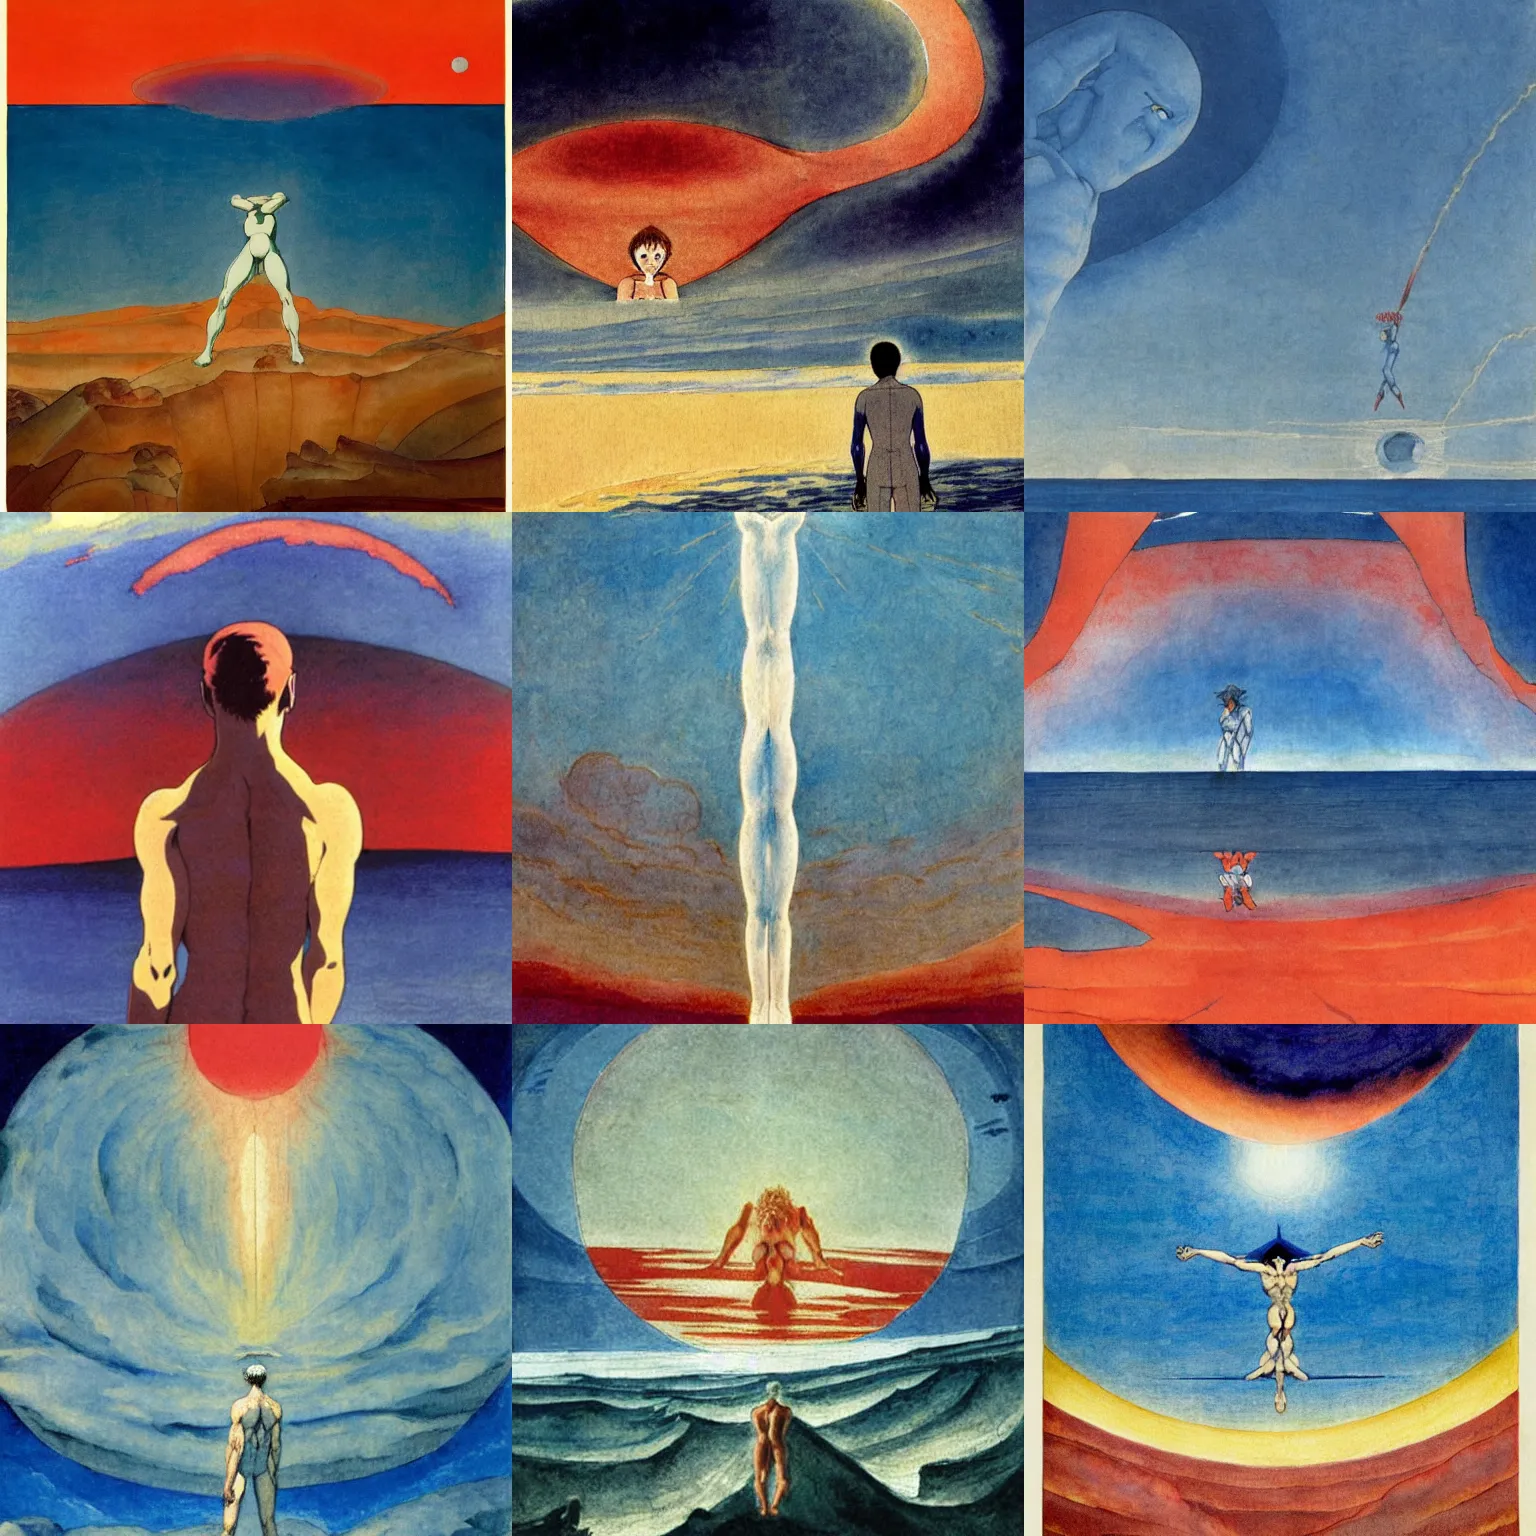 Prompt: end of evangelion poster, a gigantic pale blue head on the horizon looking upward, red ocean, sandy beach, painted in watercolor by william blake, 1 8 2 6.